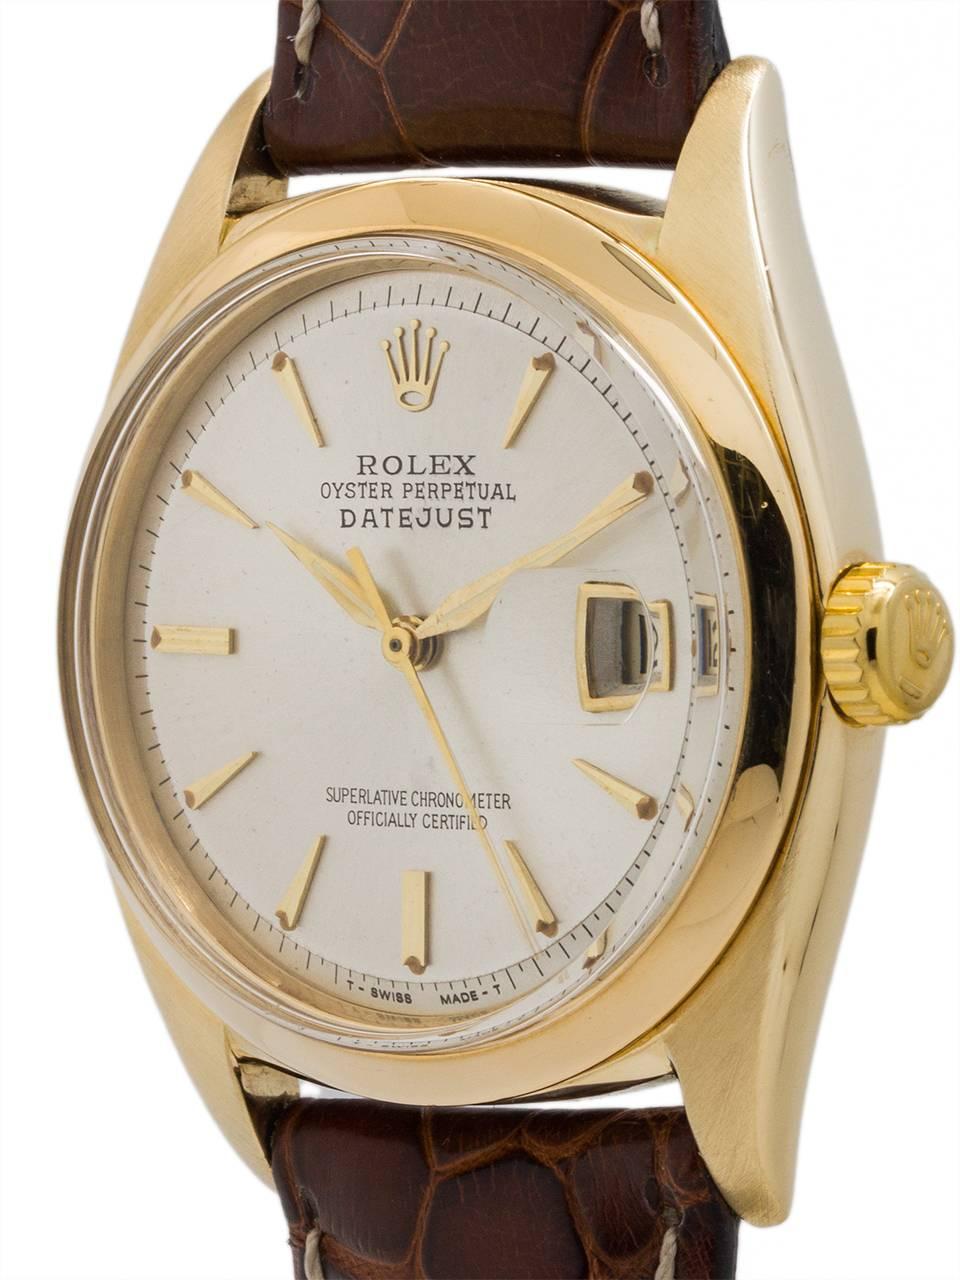 Rolex 14K yellow gold Datejust ref 1601 serial number 779,xxx circa 1962. Featuring 36mm diameter Oyster case with smooth bezel, acrylic crystal and beautiful condition original silvered satin dial with applied gold tapered indexes, Rolex crown logo